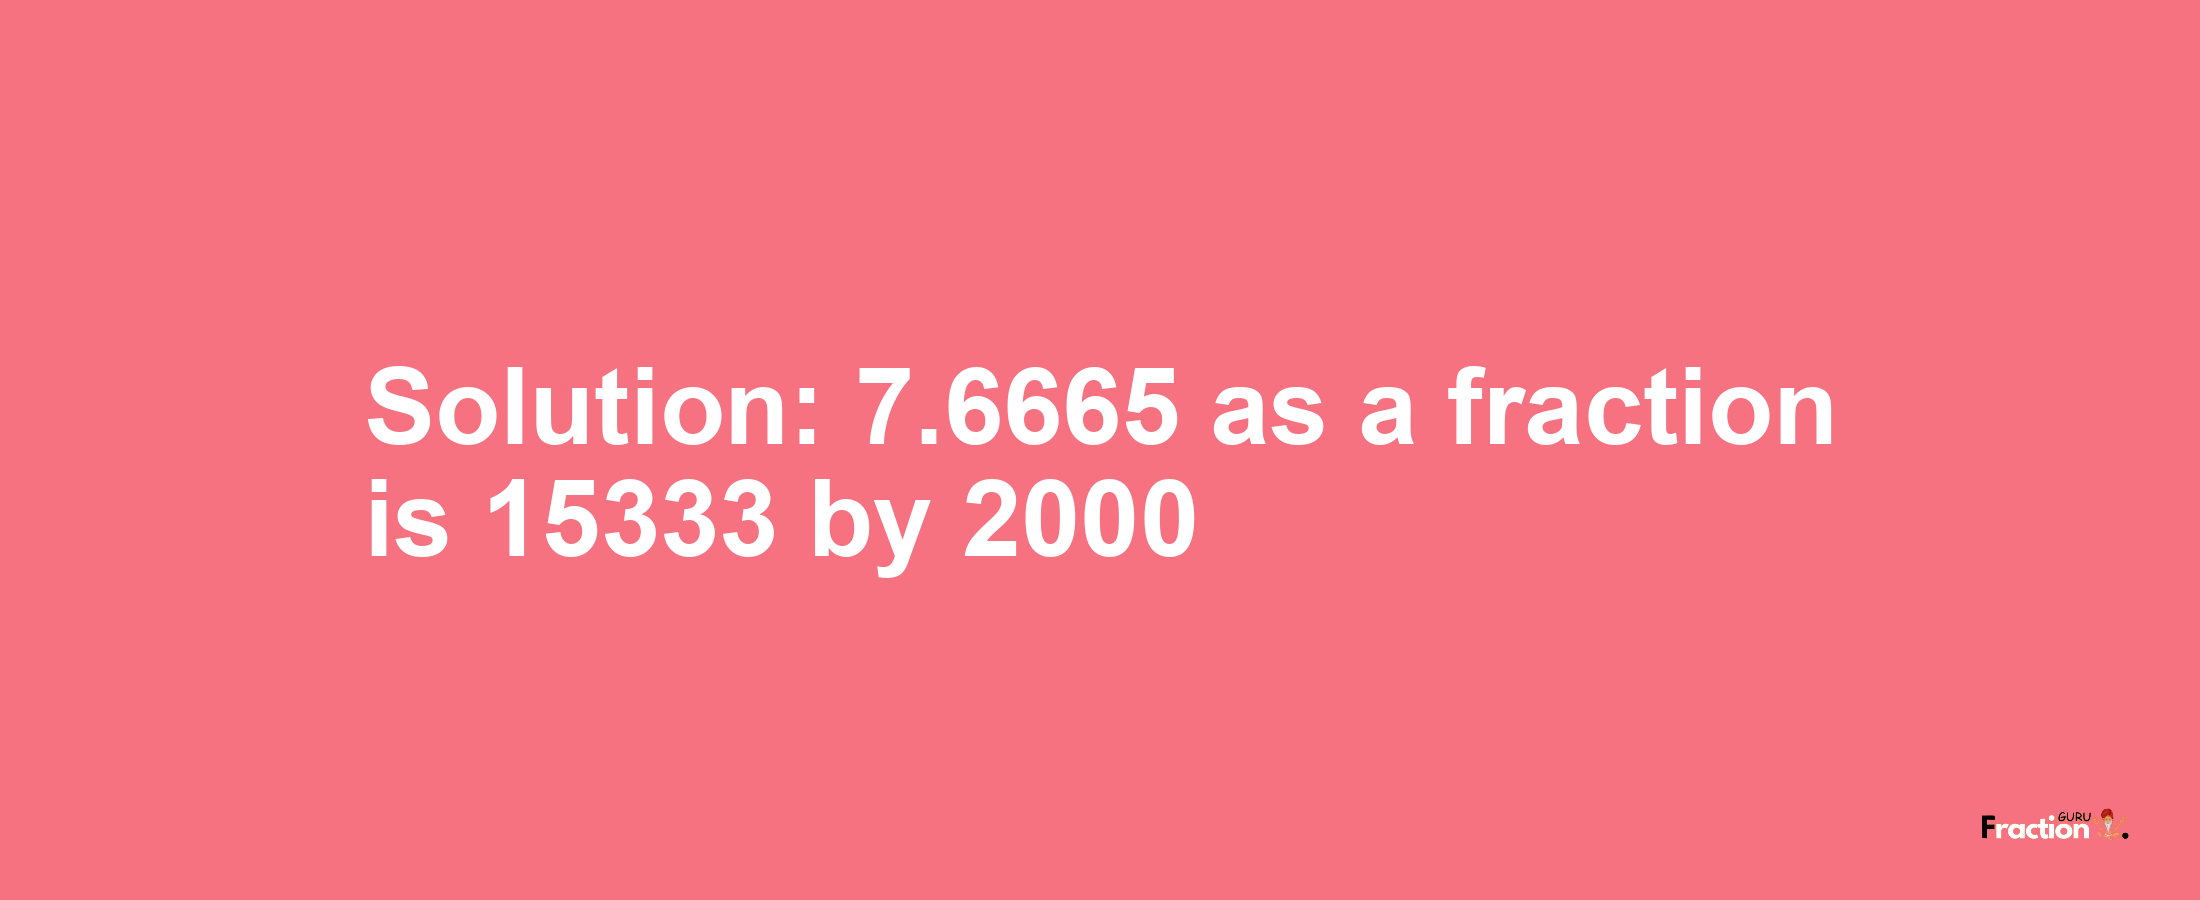 Solution:7.6665 as a fraction is 15333/2000